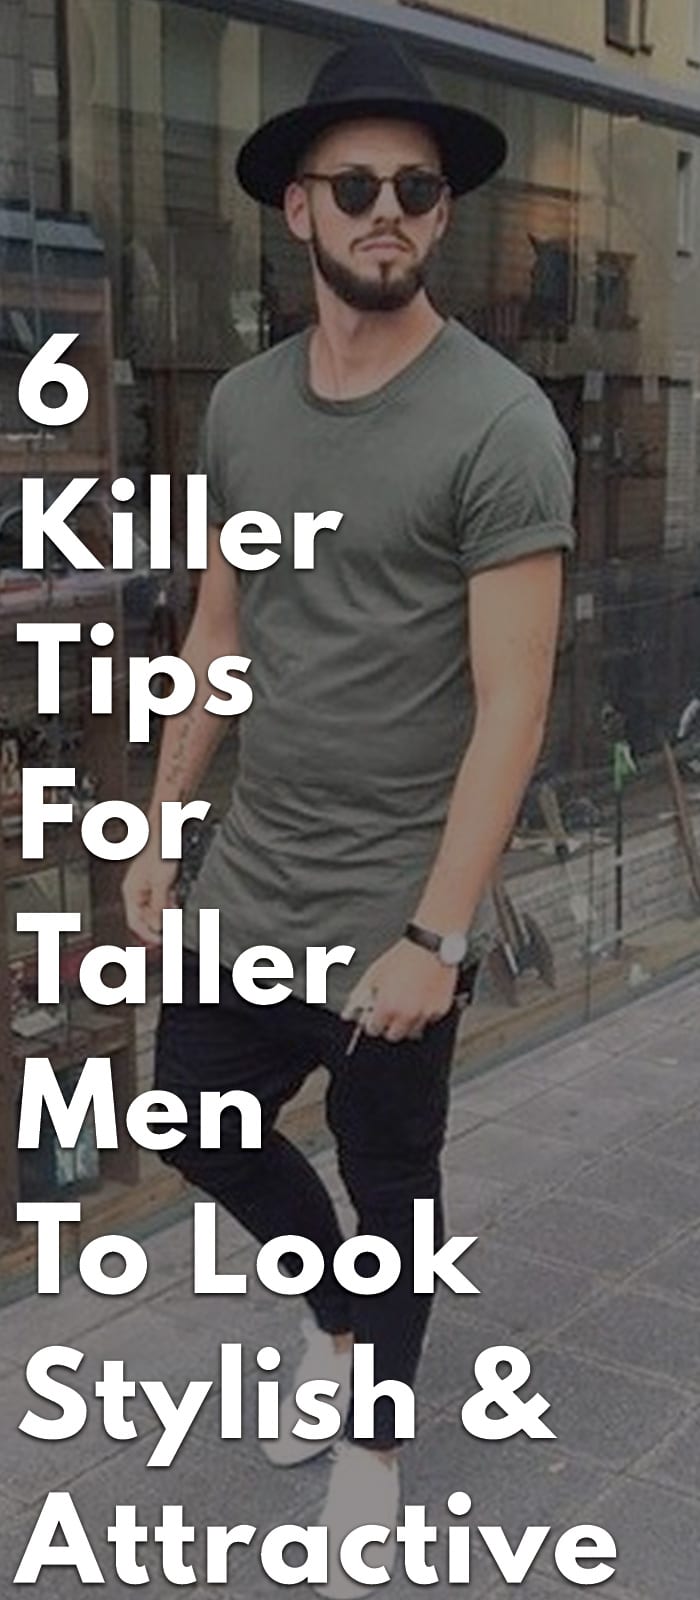 6-Killer-Tips-For-Taller-Men-To-Look-Stylish-&-Attractive